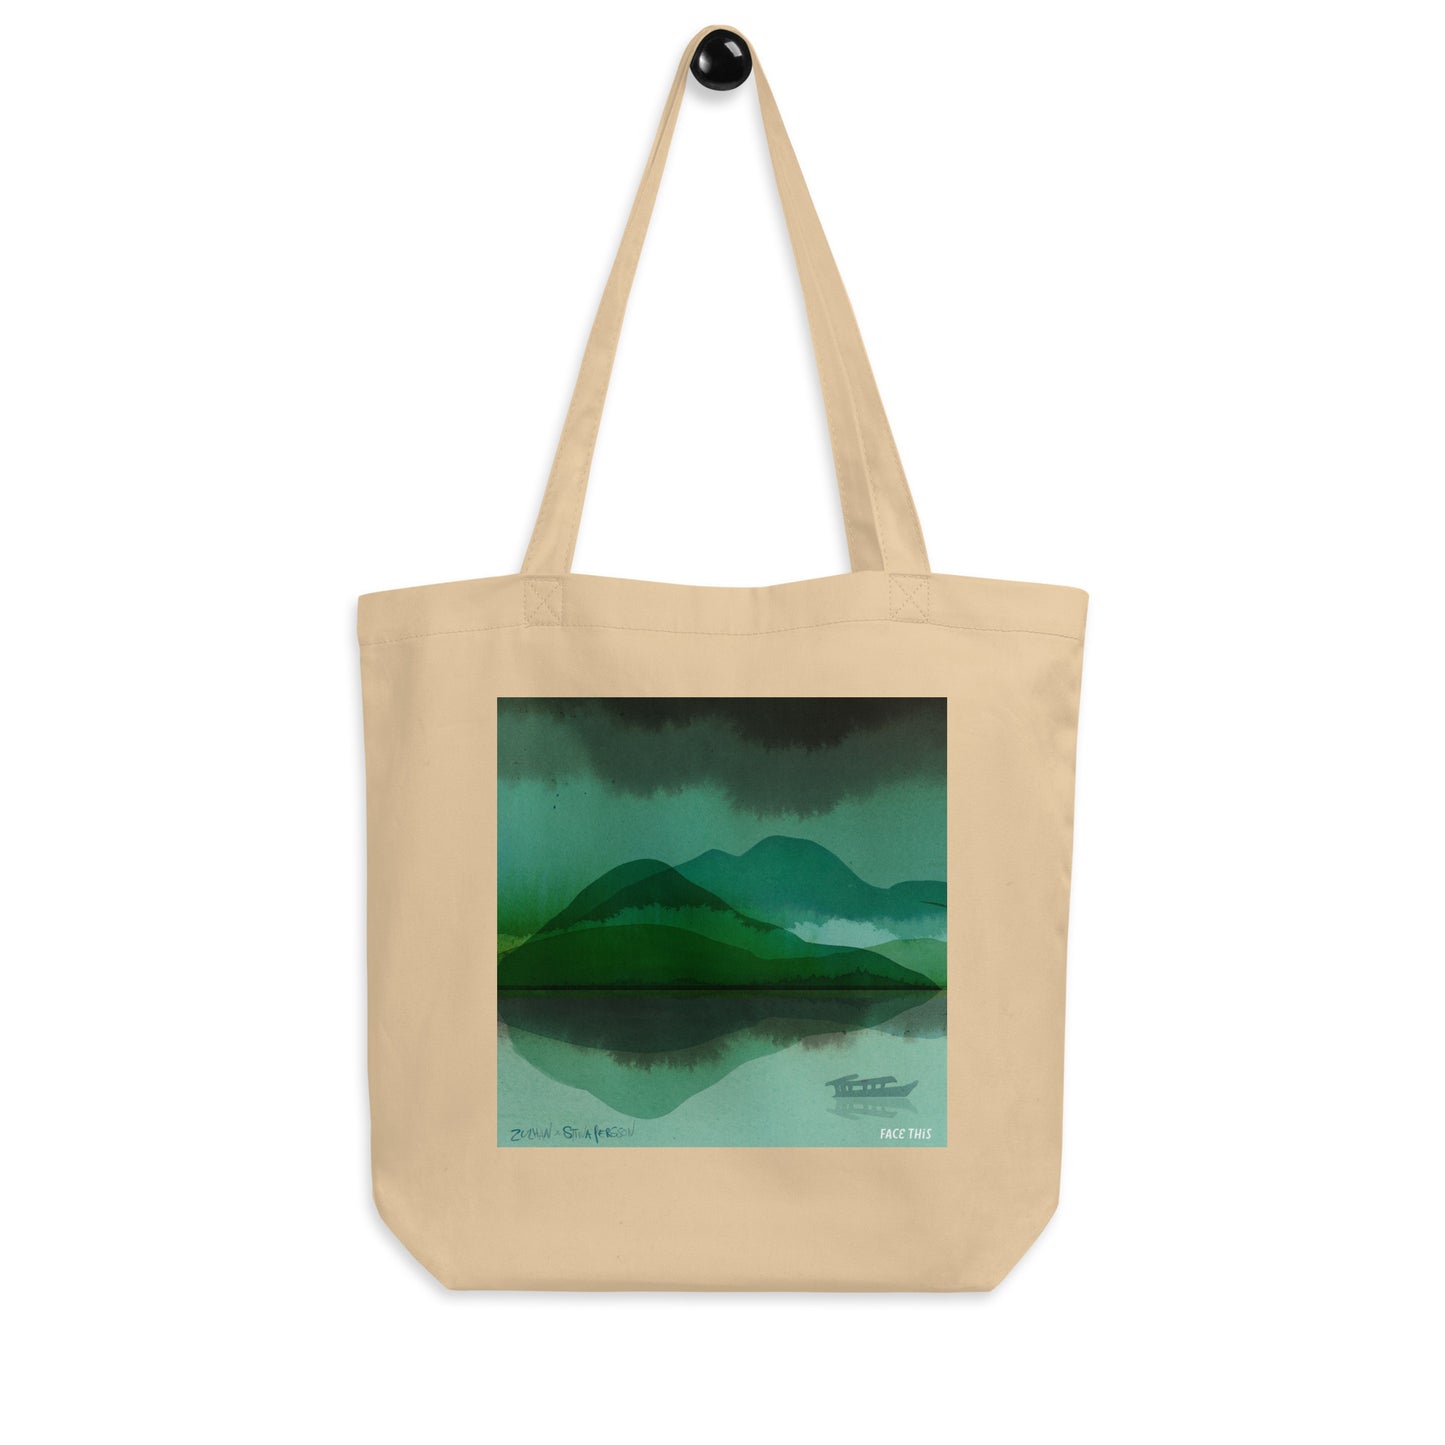 Stina Persson x Zulhan - Face This Eco Tote Bag